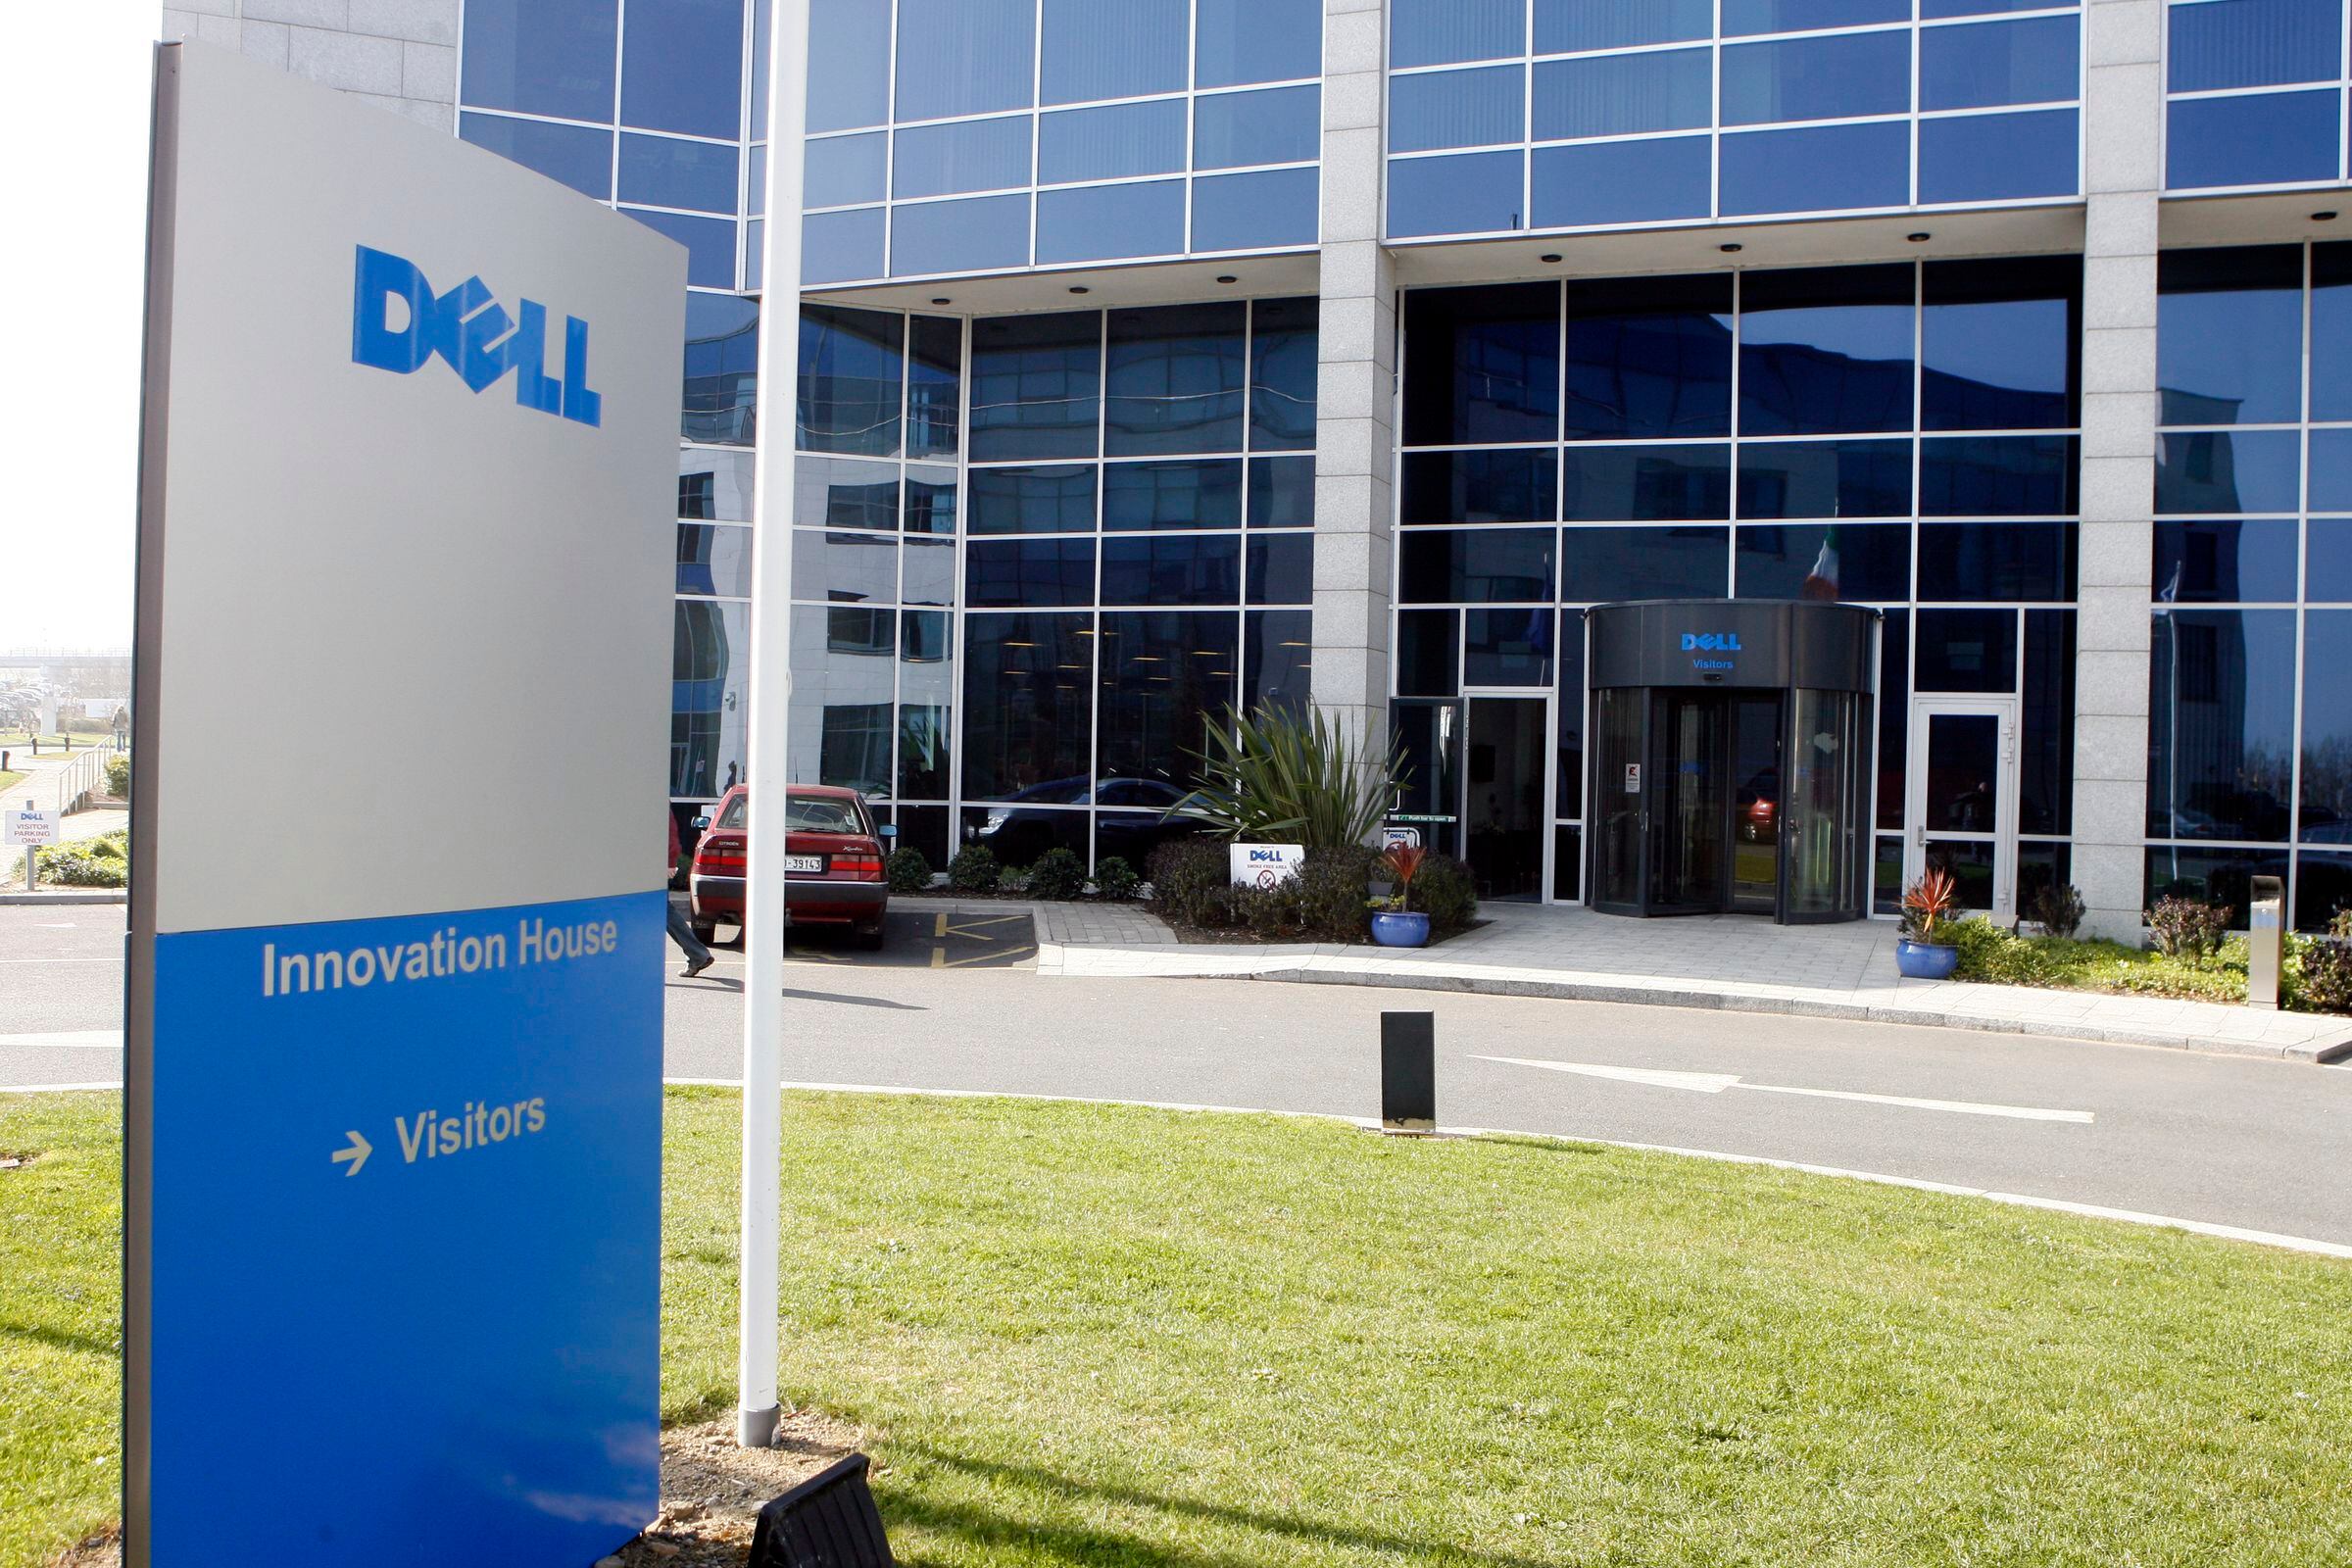 Dell to cut 5% of workforce worldwide as PC demand falls – The Irish Times